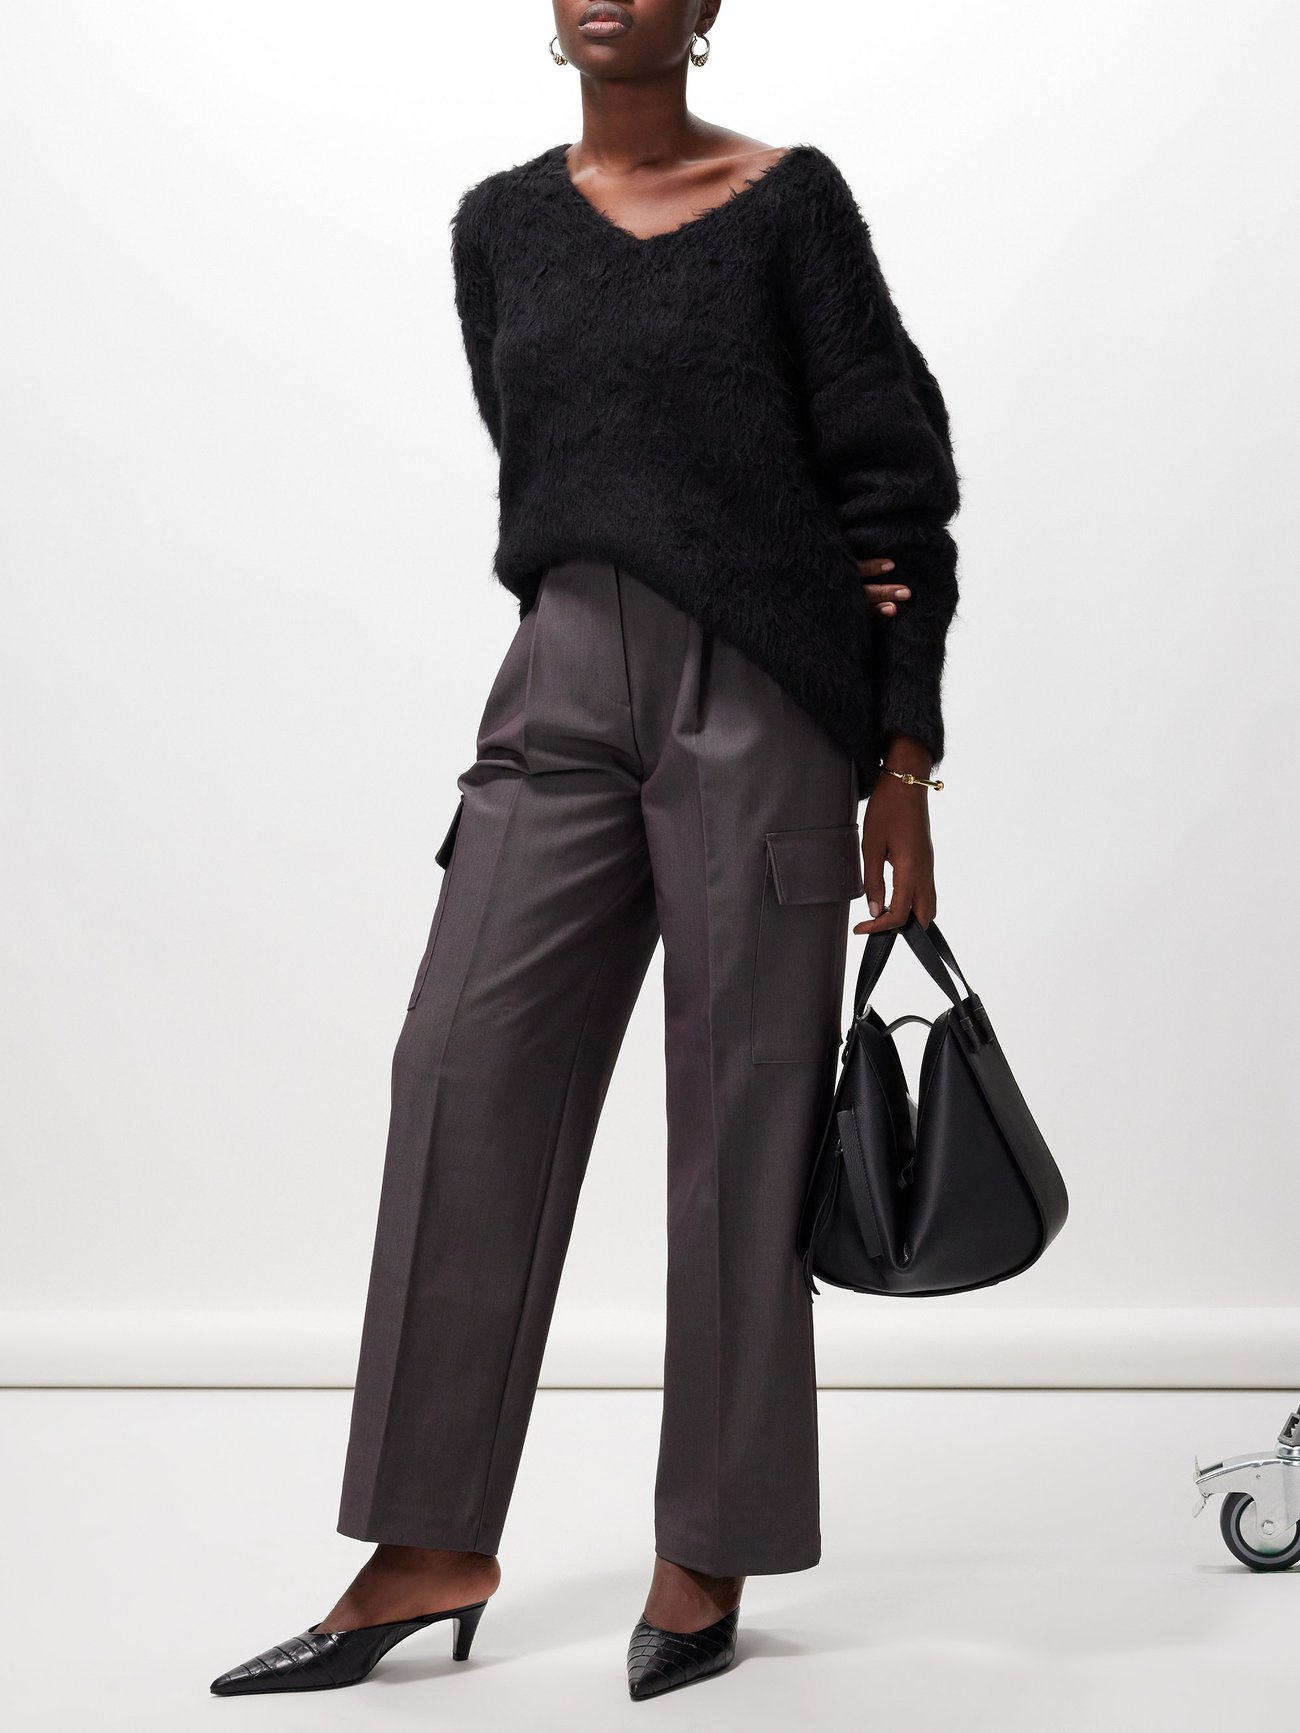 The Frankie Shop imparts a fluidity to these grey cargo trousers, cut to a high waist and wide leg from technical cloth that falls in a flattering relaxed drape.